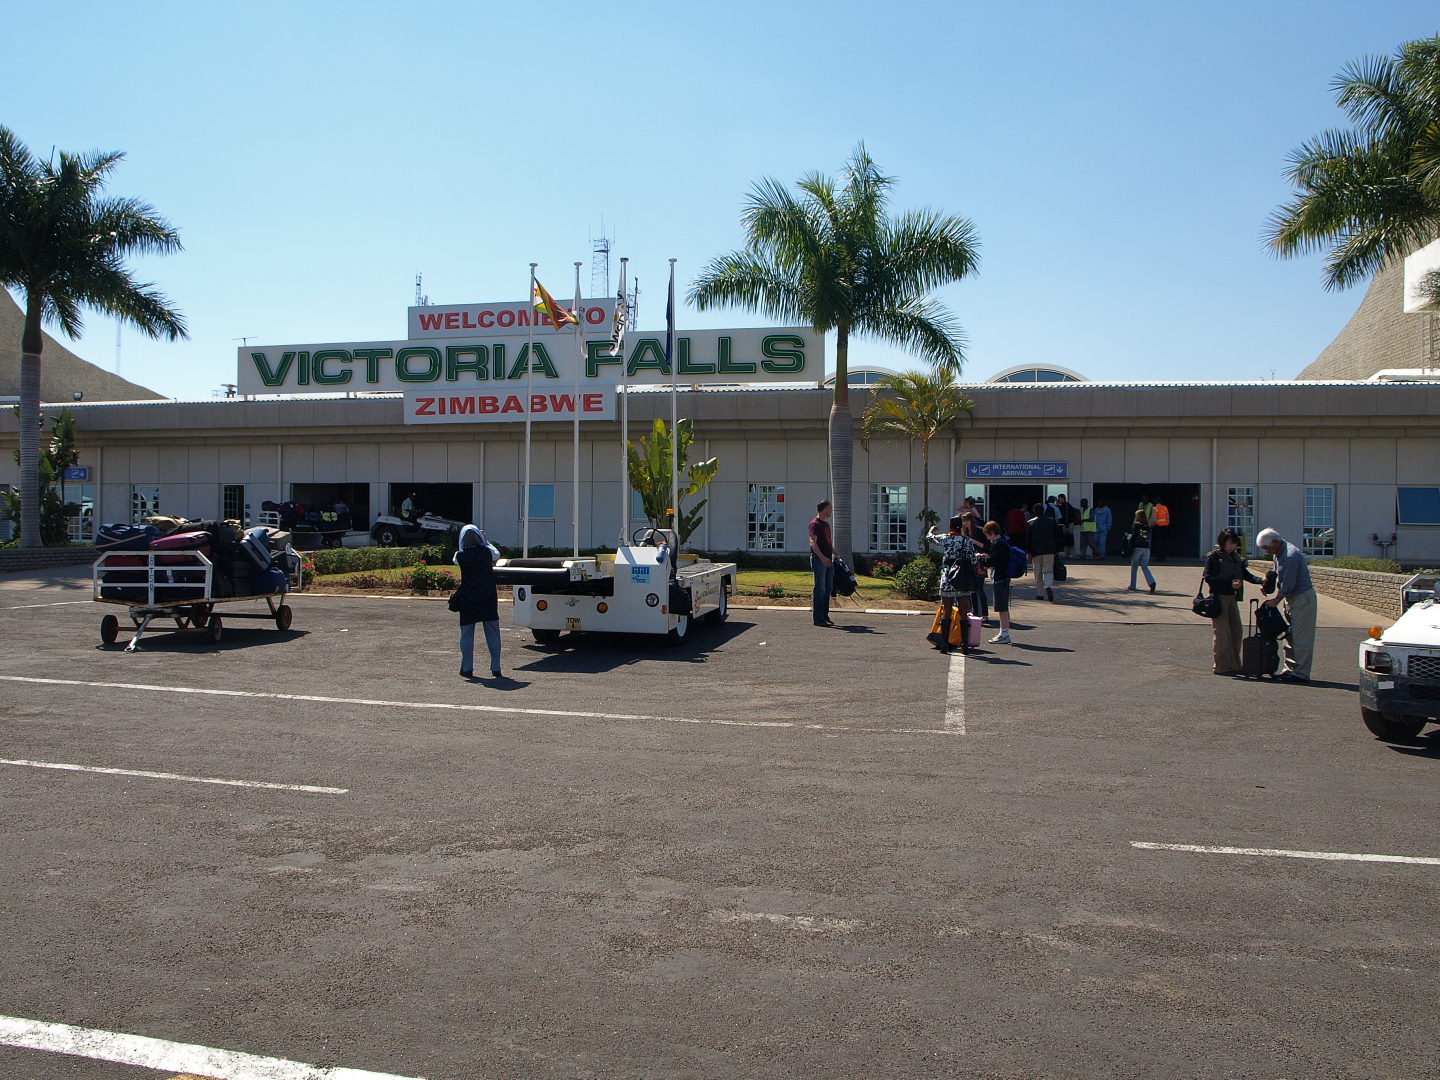 Vic Falls Airport expansion on schedule